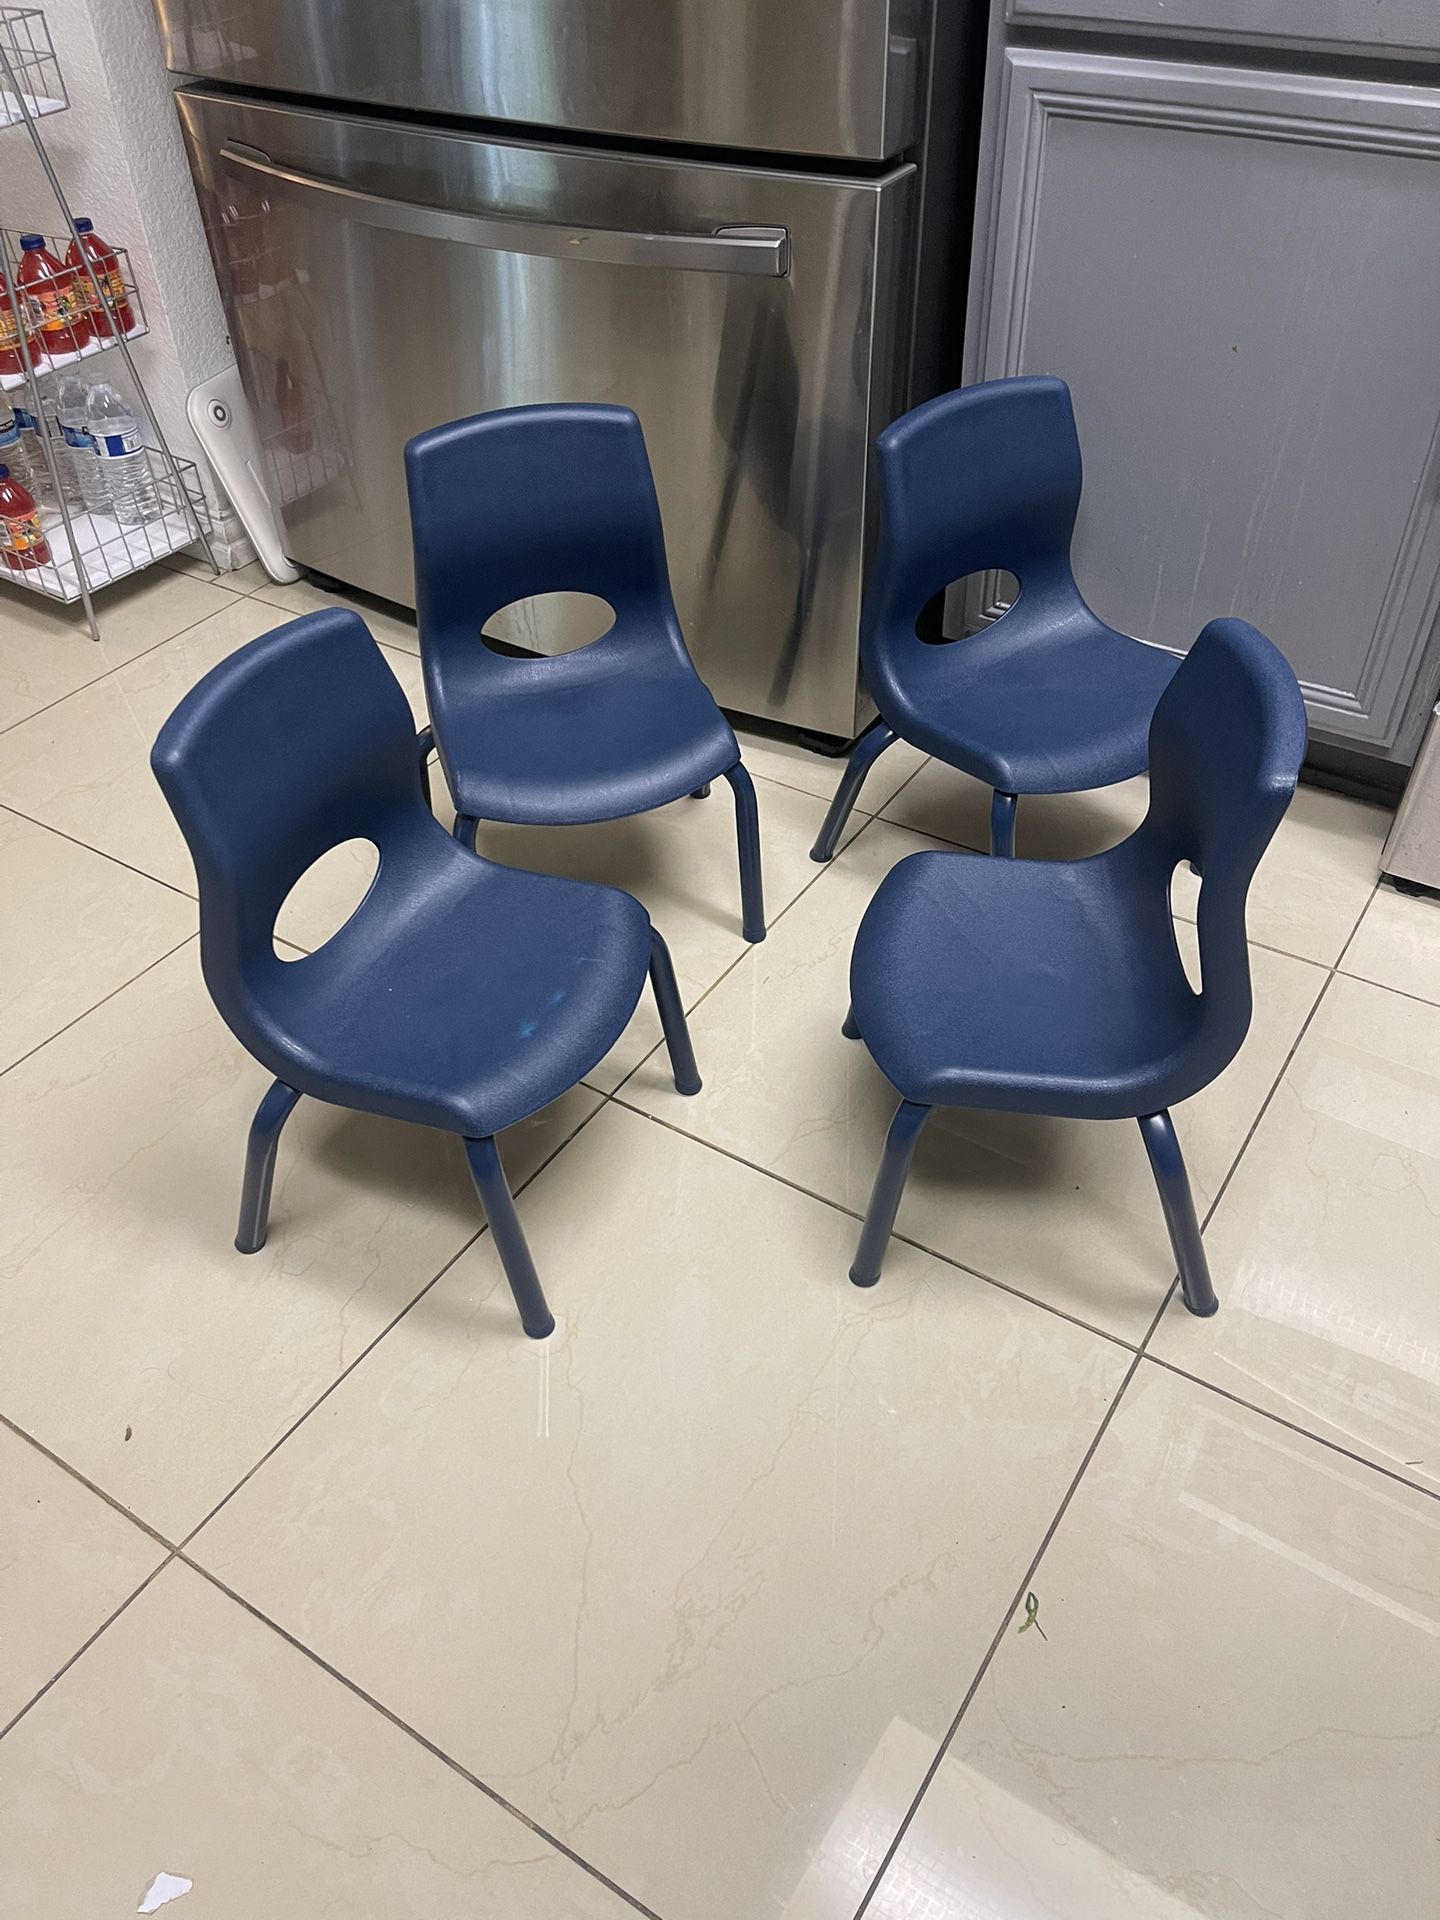 Small Size 5 Years Or Younger Kids New Chairs  